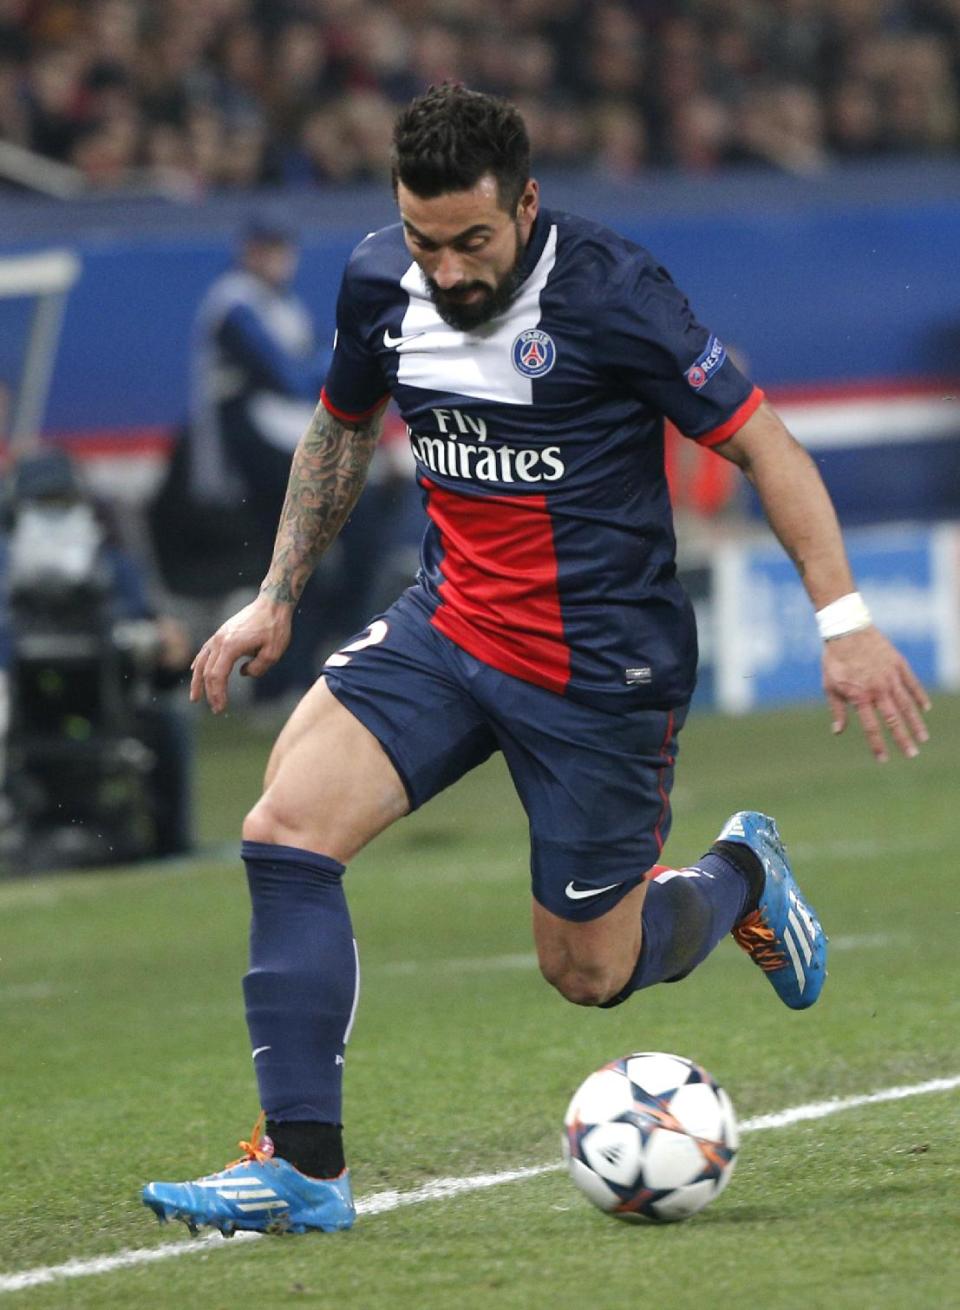 PSG's Ezequiel Lavezzi runs with the ball during the Champions League round of 16 second leg soccer match between Paris Saint Germain and Bayer Leverkusen at the Parc des Princes stadium in Paris, Wednesday, March 12, 2014. (AP Photo/Christophe Ena)